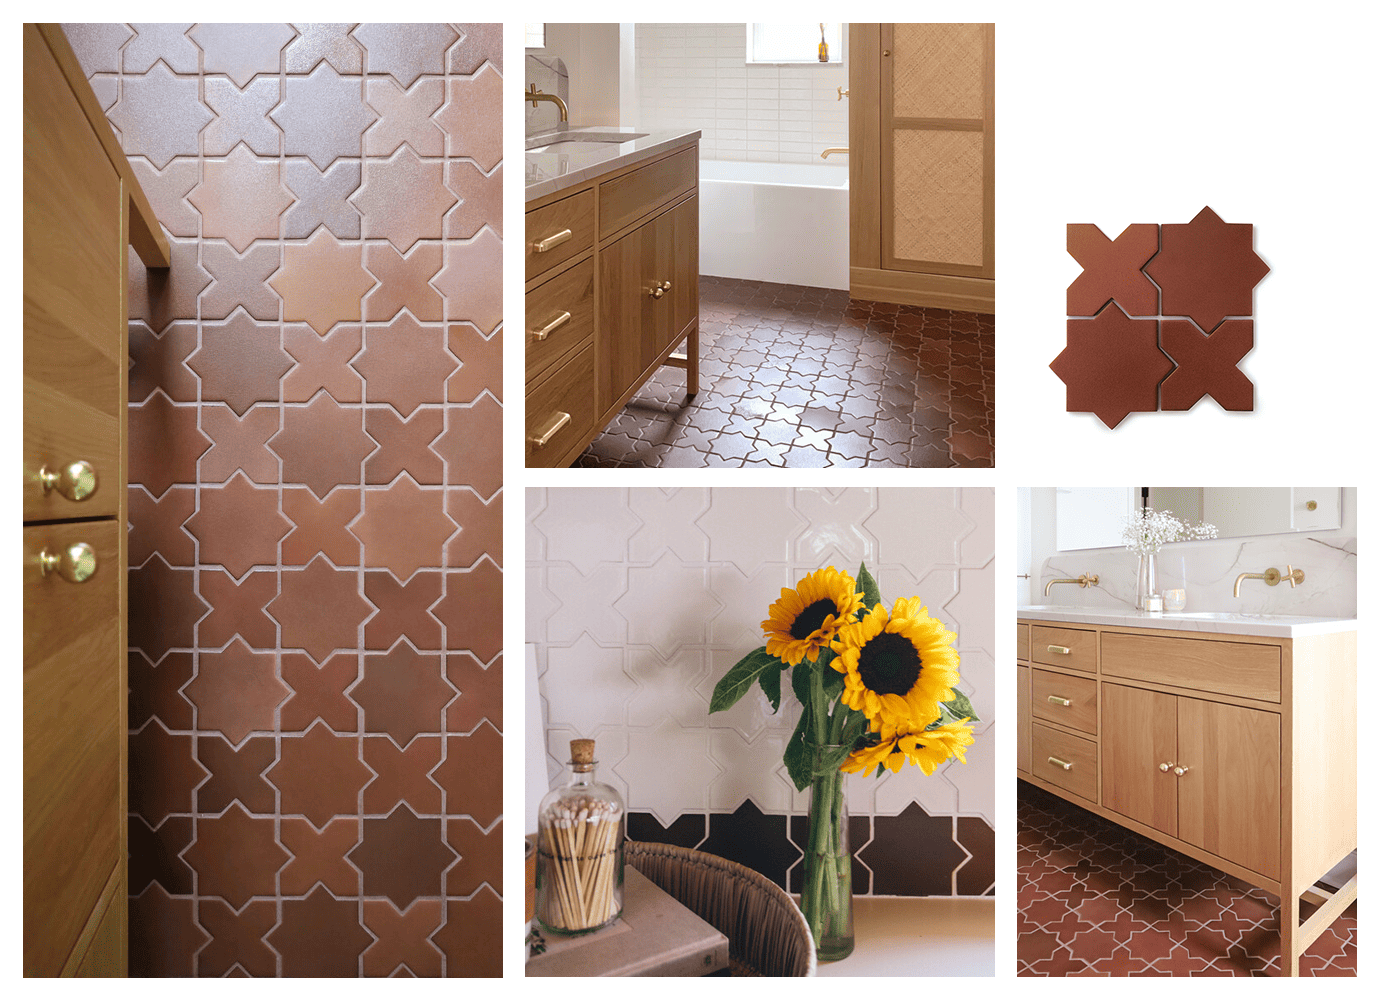 A collage of photos showing mosaic floors with stunning patterns and colors, complementing the surroundings